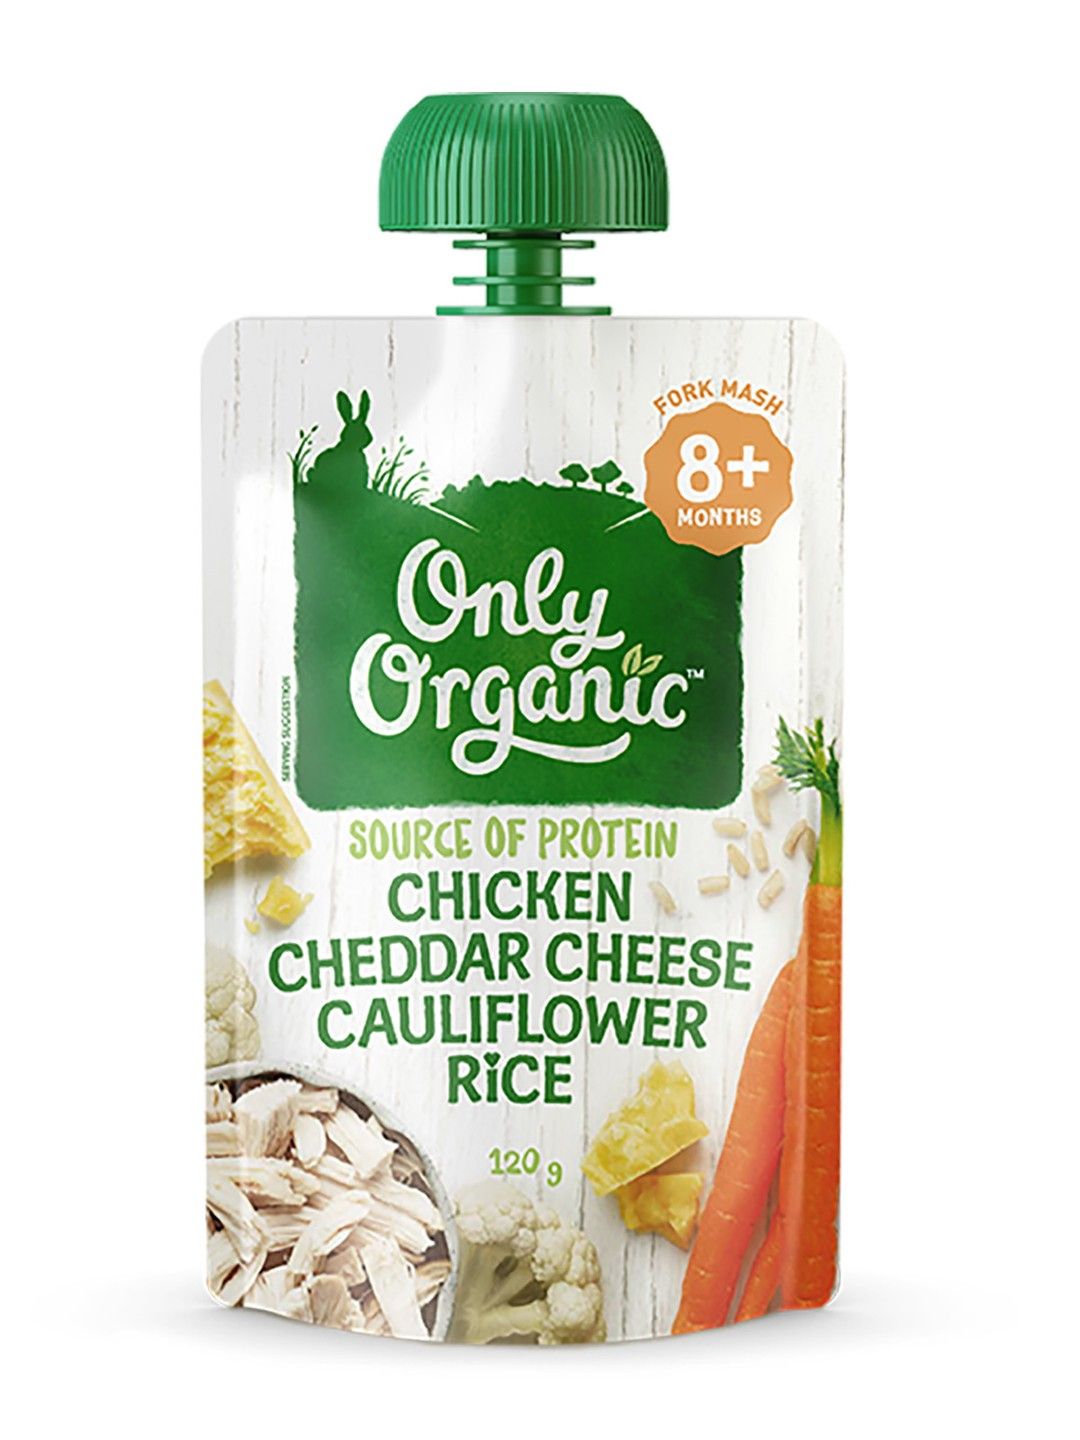 Only Organic Chicken Cheddar Cheese Cauliflower Rice (120g) (No Color- Image 1)